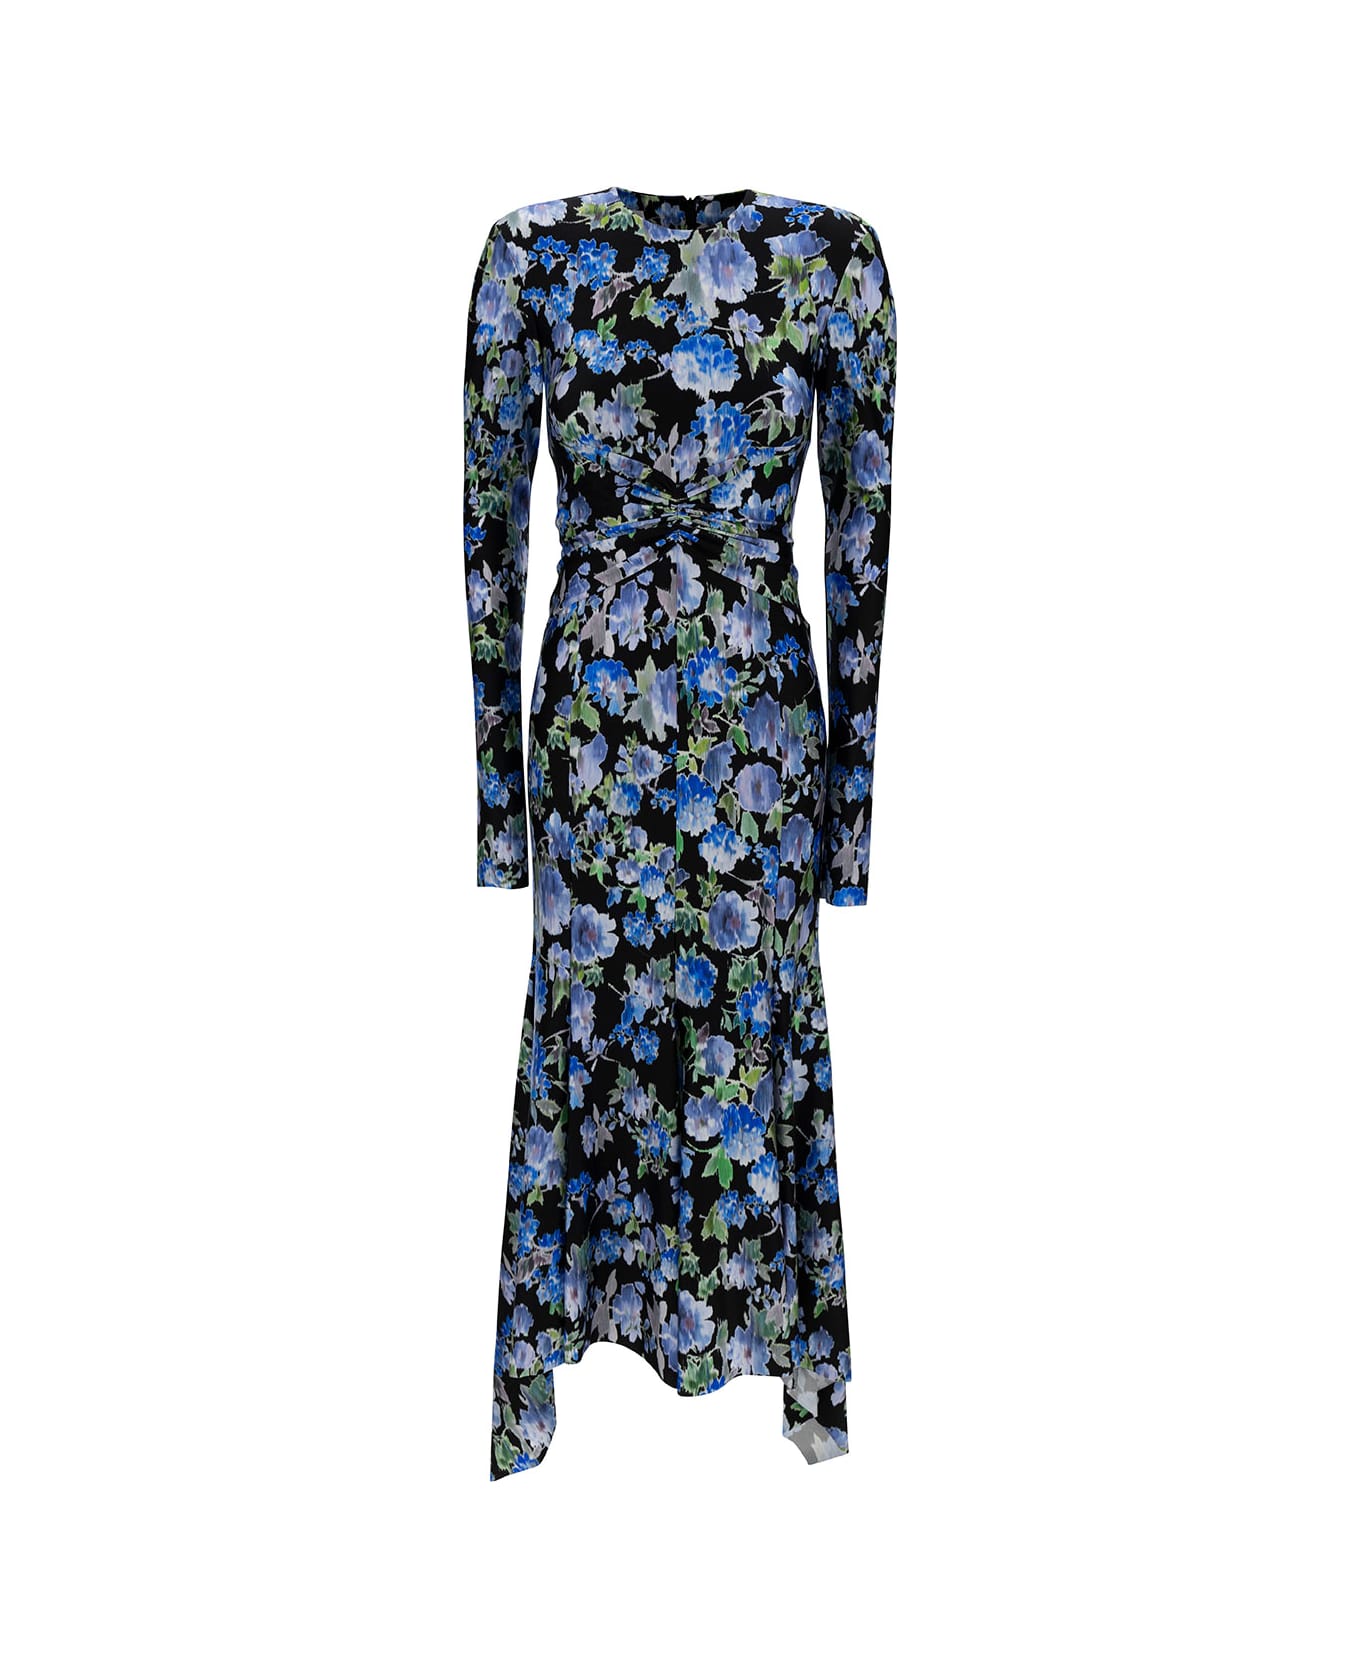 Philosophy di Lorenzo Serafini Black And Blue Maxi Dress With All-over Floreal Print In Stretch Fabric Woman - Blu